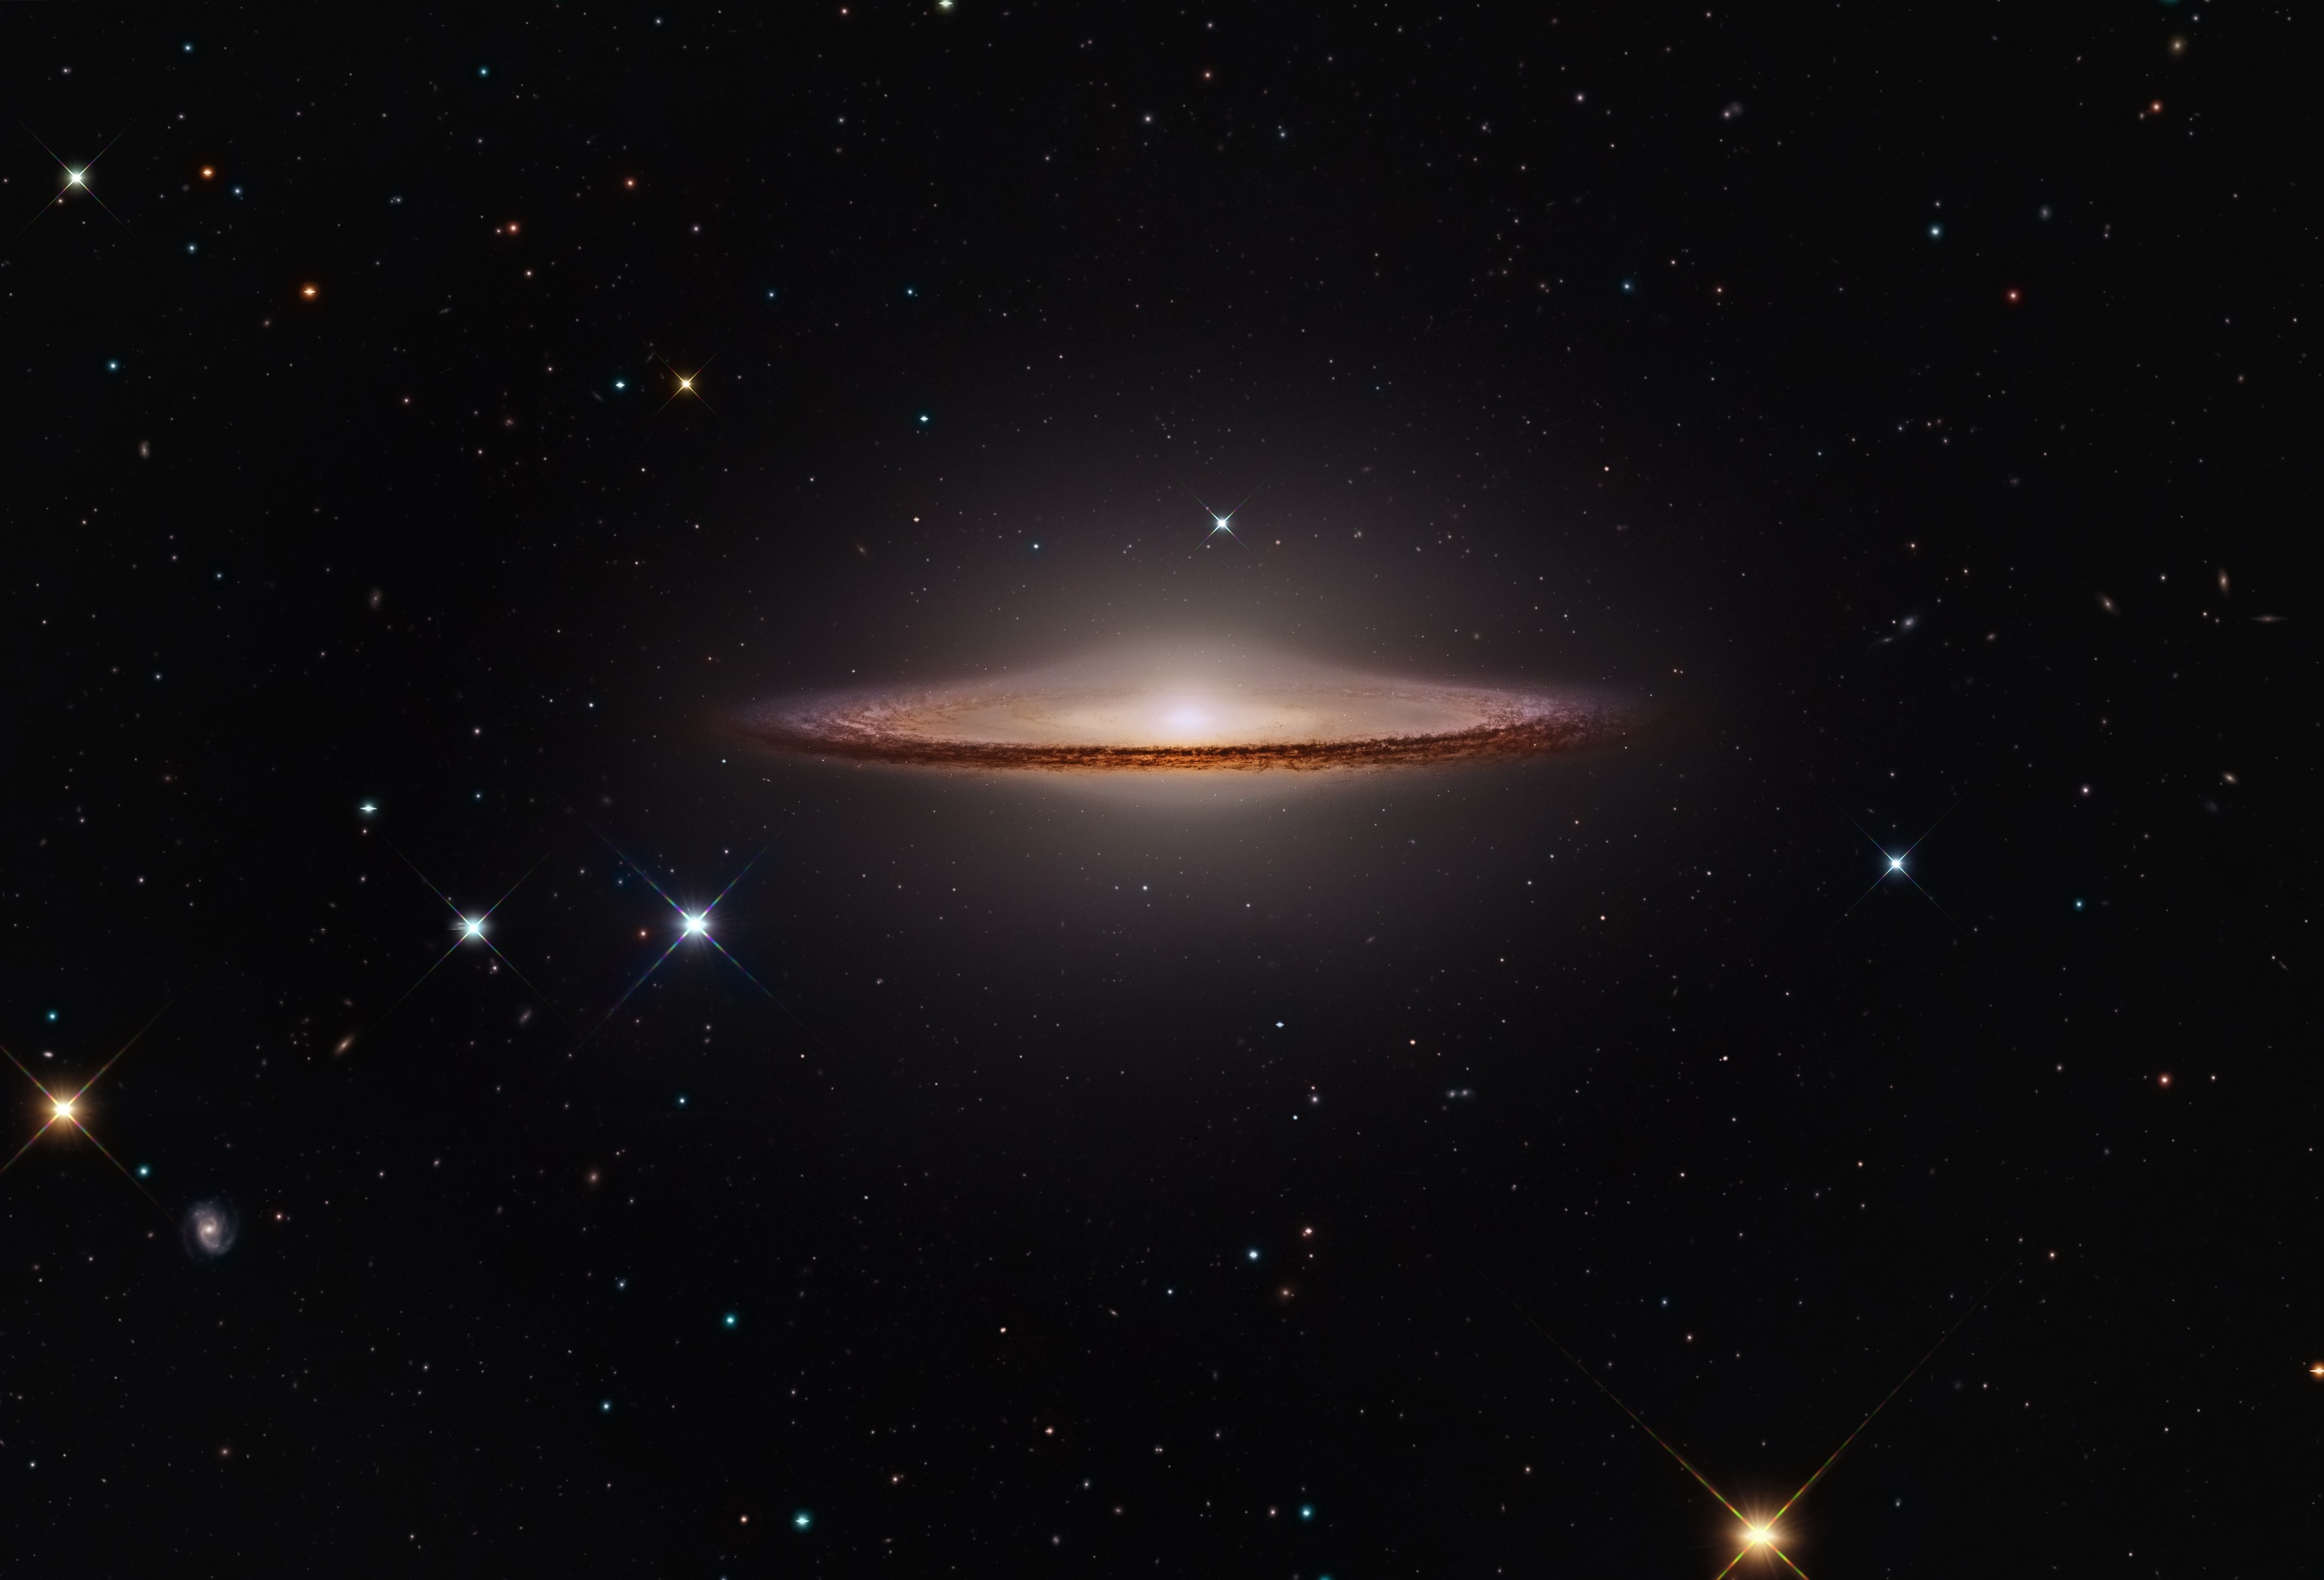 Wallpaper, galaxy, atmosphere, universe, astronomy, Sombrero Galaxy, midnight, Messier M star, outer space, astronomical object 4414x3000